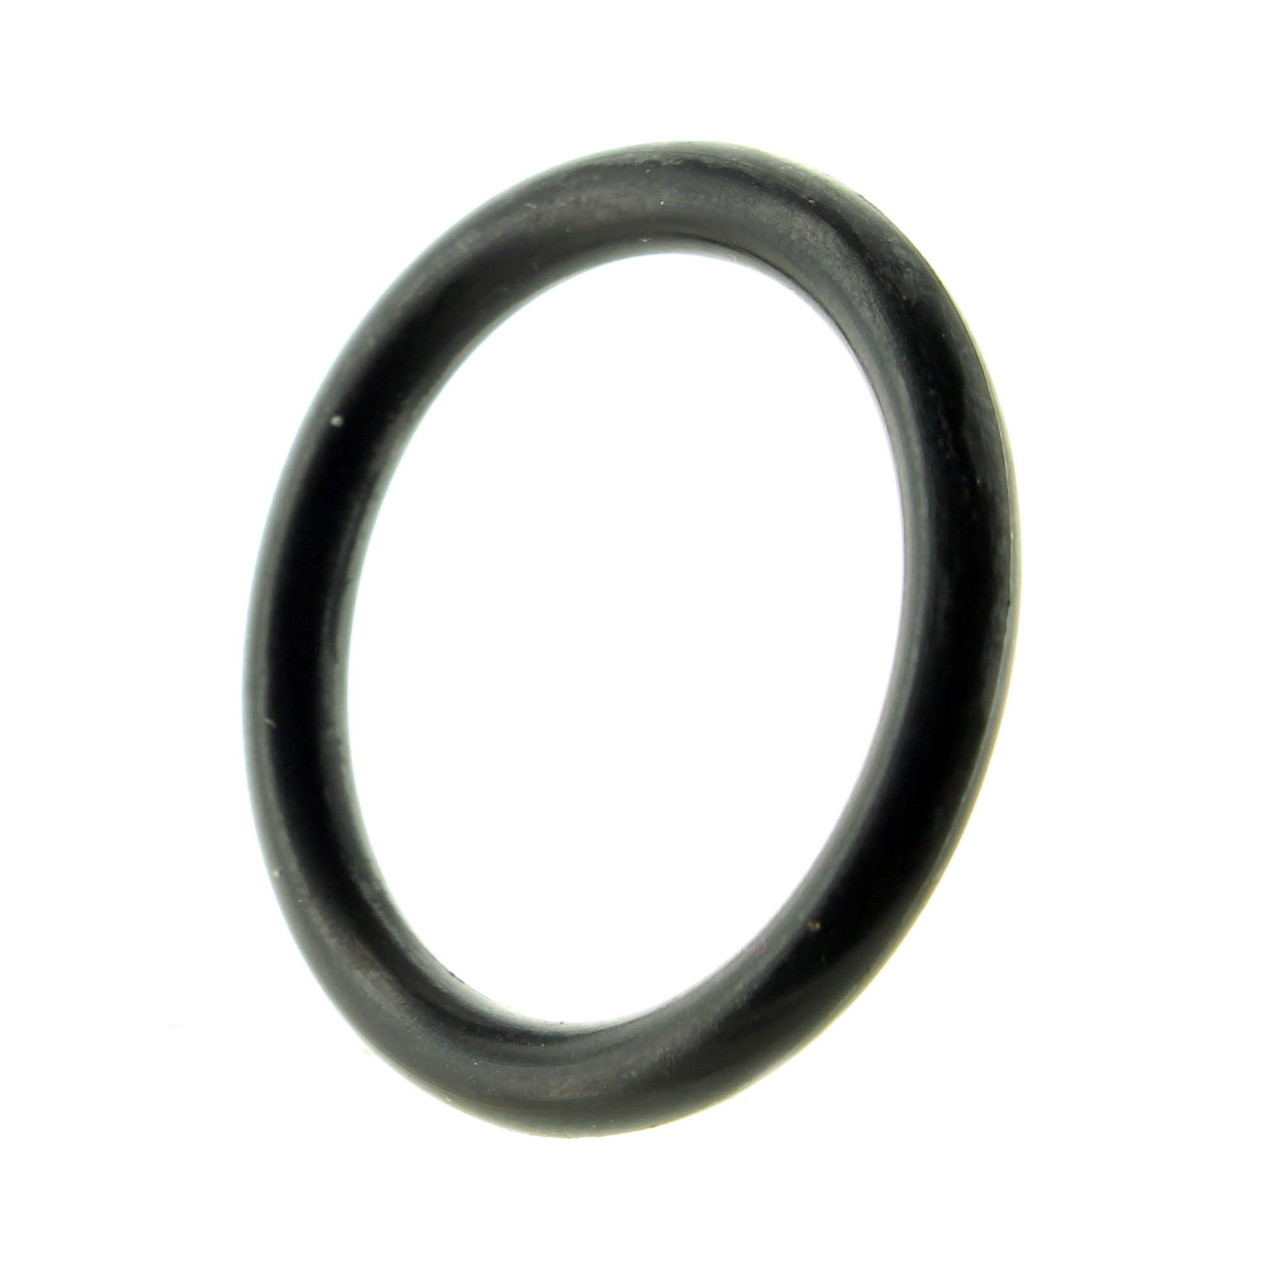 Arctic Cat New OEM Floating Piston Rubber O-Ring, 1604-277